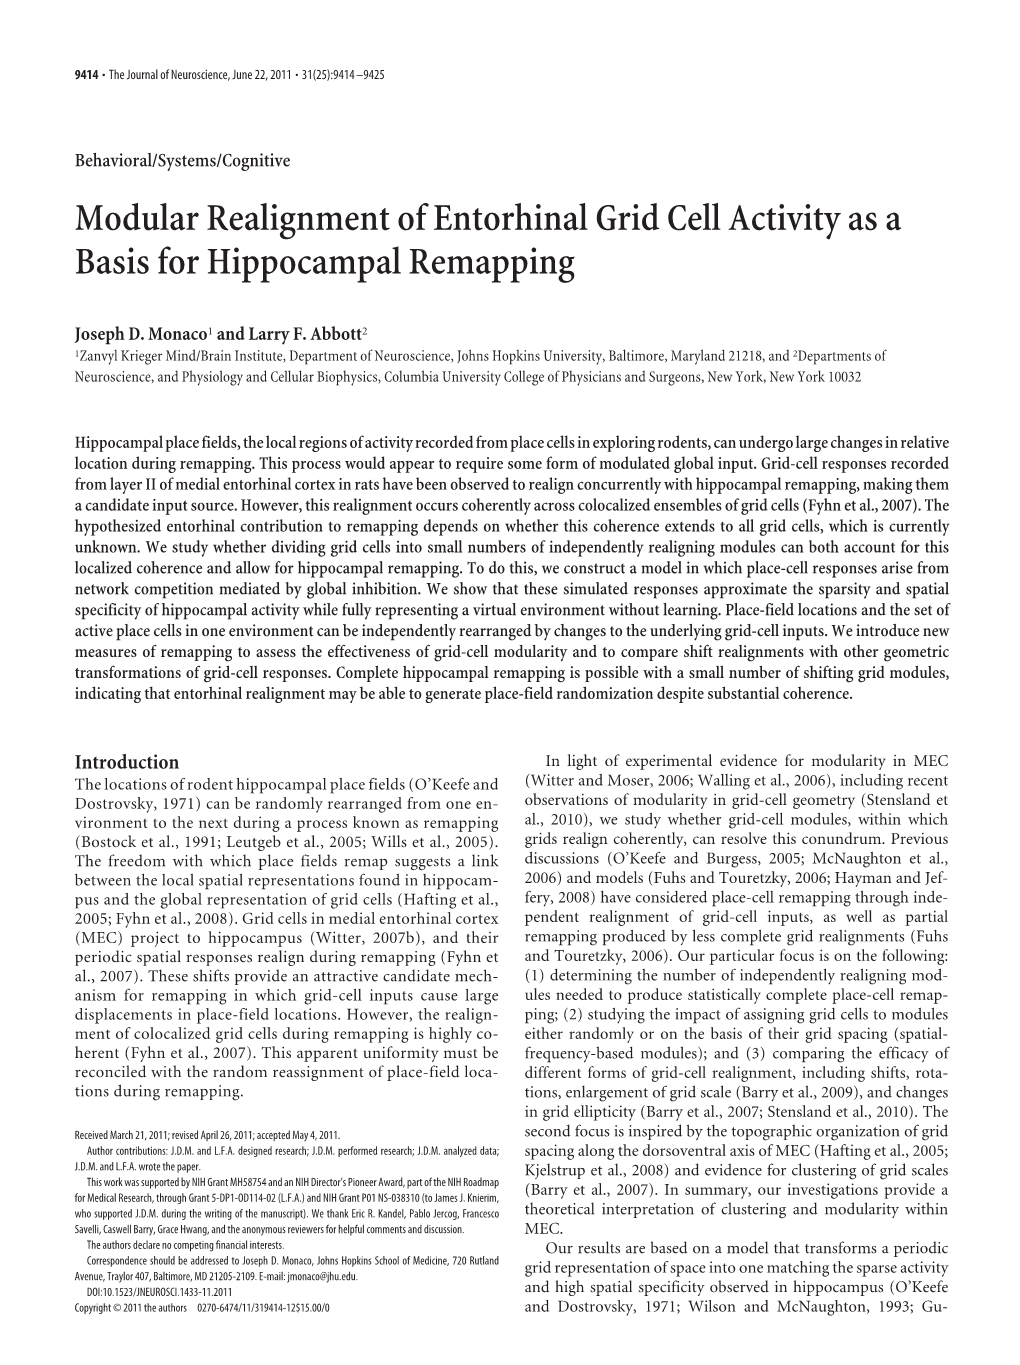 Modular Realignment of Entorhinal Grid Cell Activity As a Basis for Hippocampal Remapping